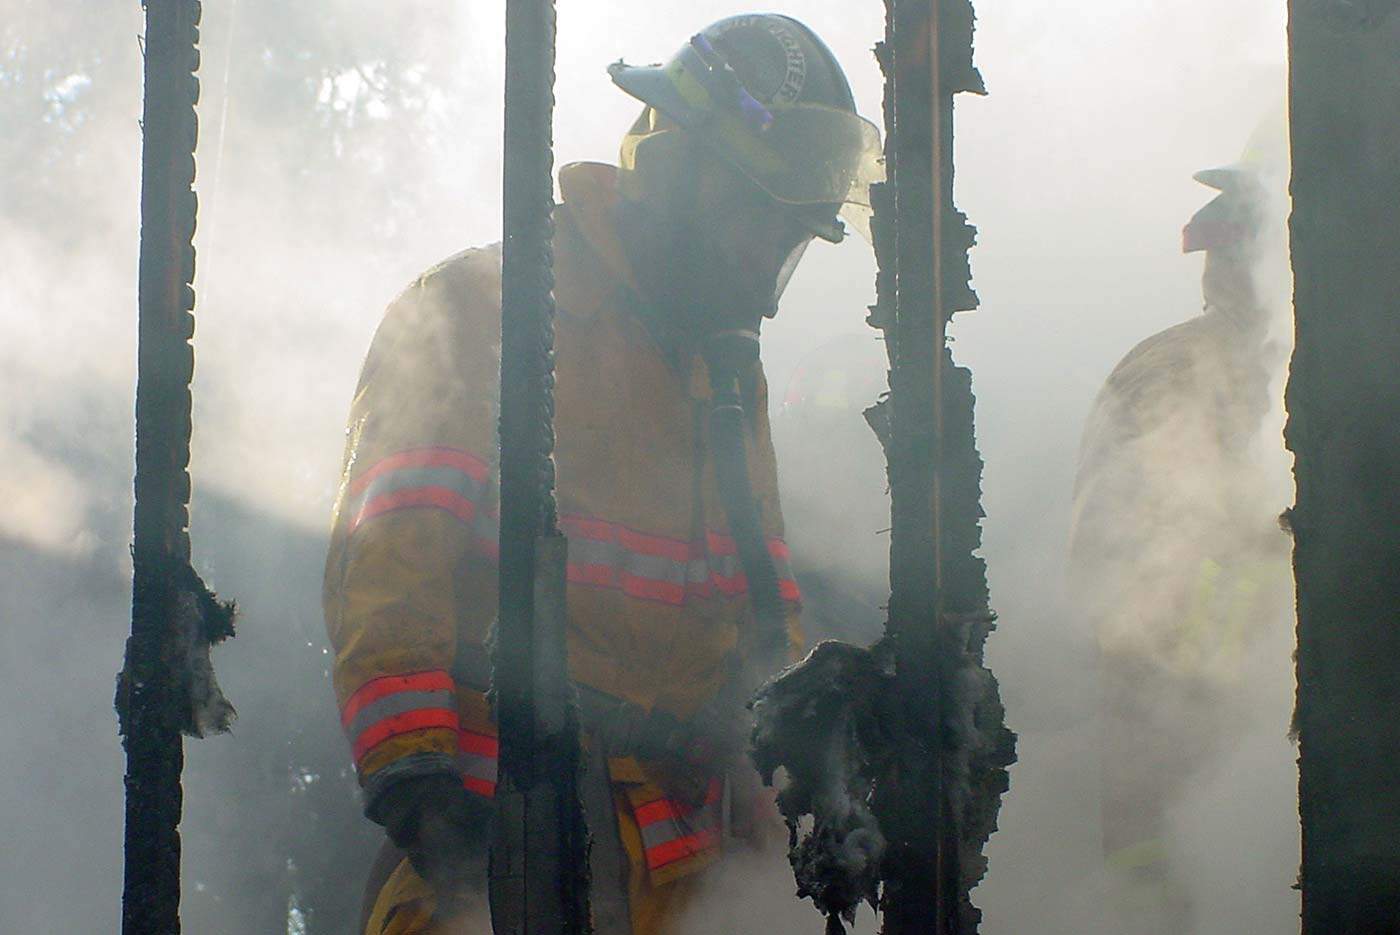 Firefighters facing cancer impacted by presumption laws